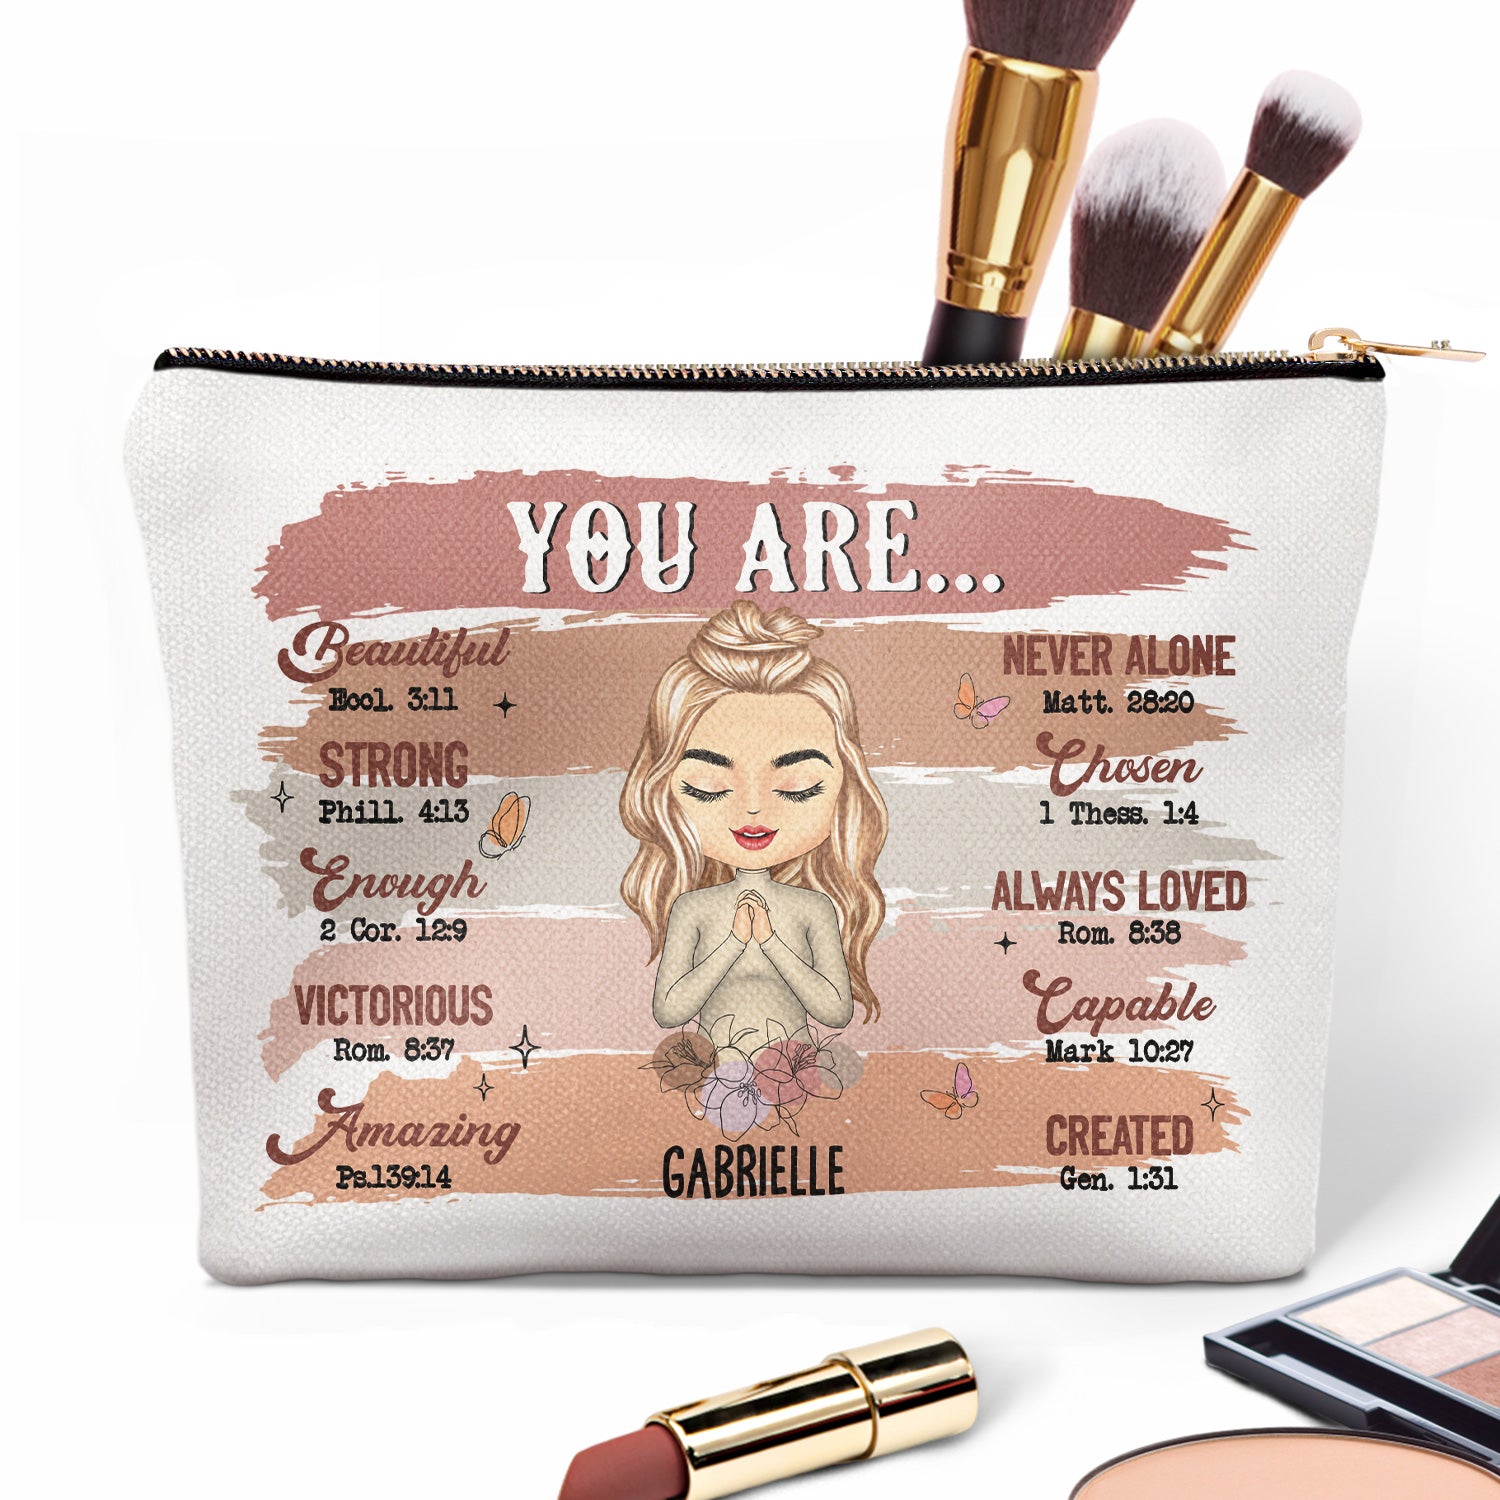 You Are Beautiful - Gift For Yourself, Gift For Women, Gift For Her - Personalized Cosmetic Bag